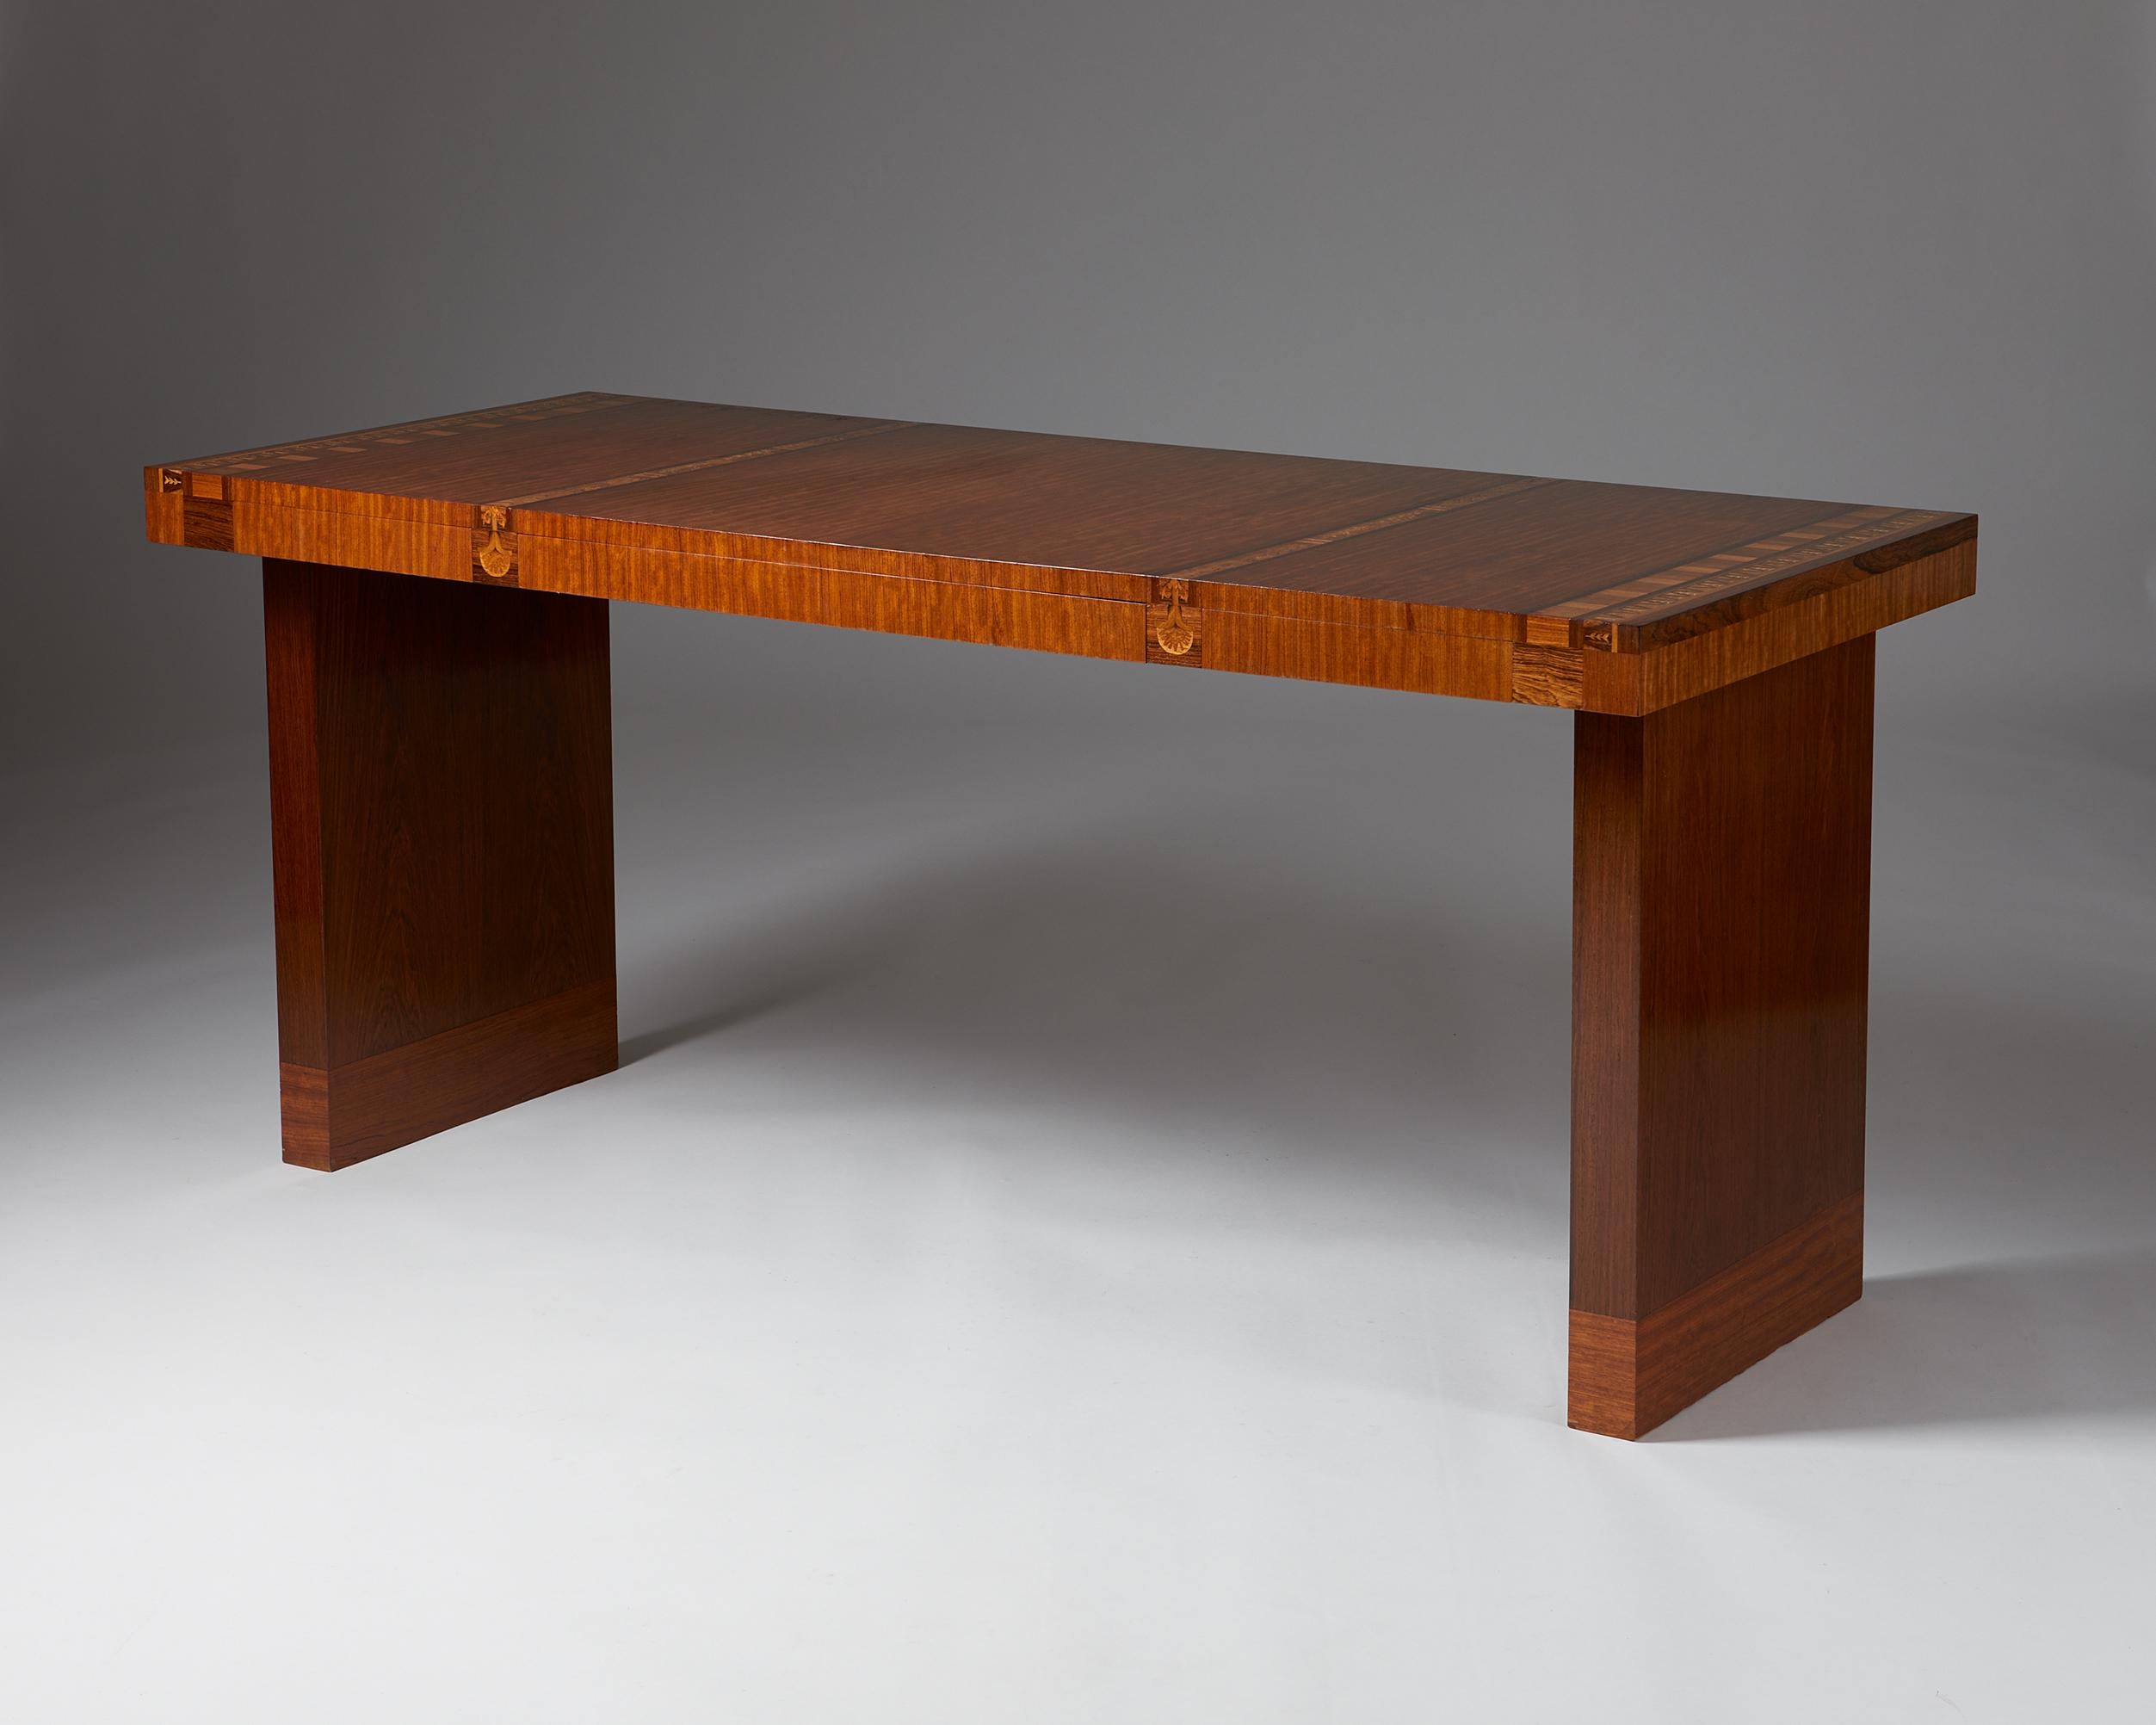 Desk designed by Carl Malmsten, Sweden, 1934.

Mahogany with inlays of walnut. 

Unique. Signed C.Malmsten.

This mahogany desk by Carl Malmsten from 1934 has simple lines and exquisite inlays of walnut. Signed and dated by Malmsten himself on the